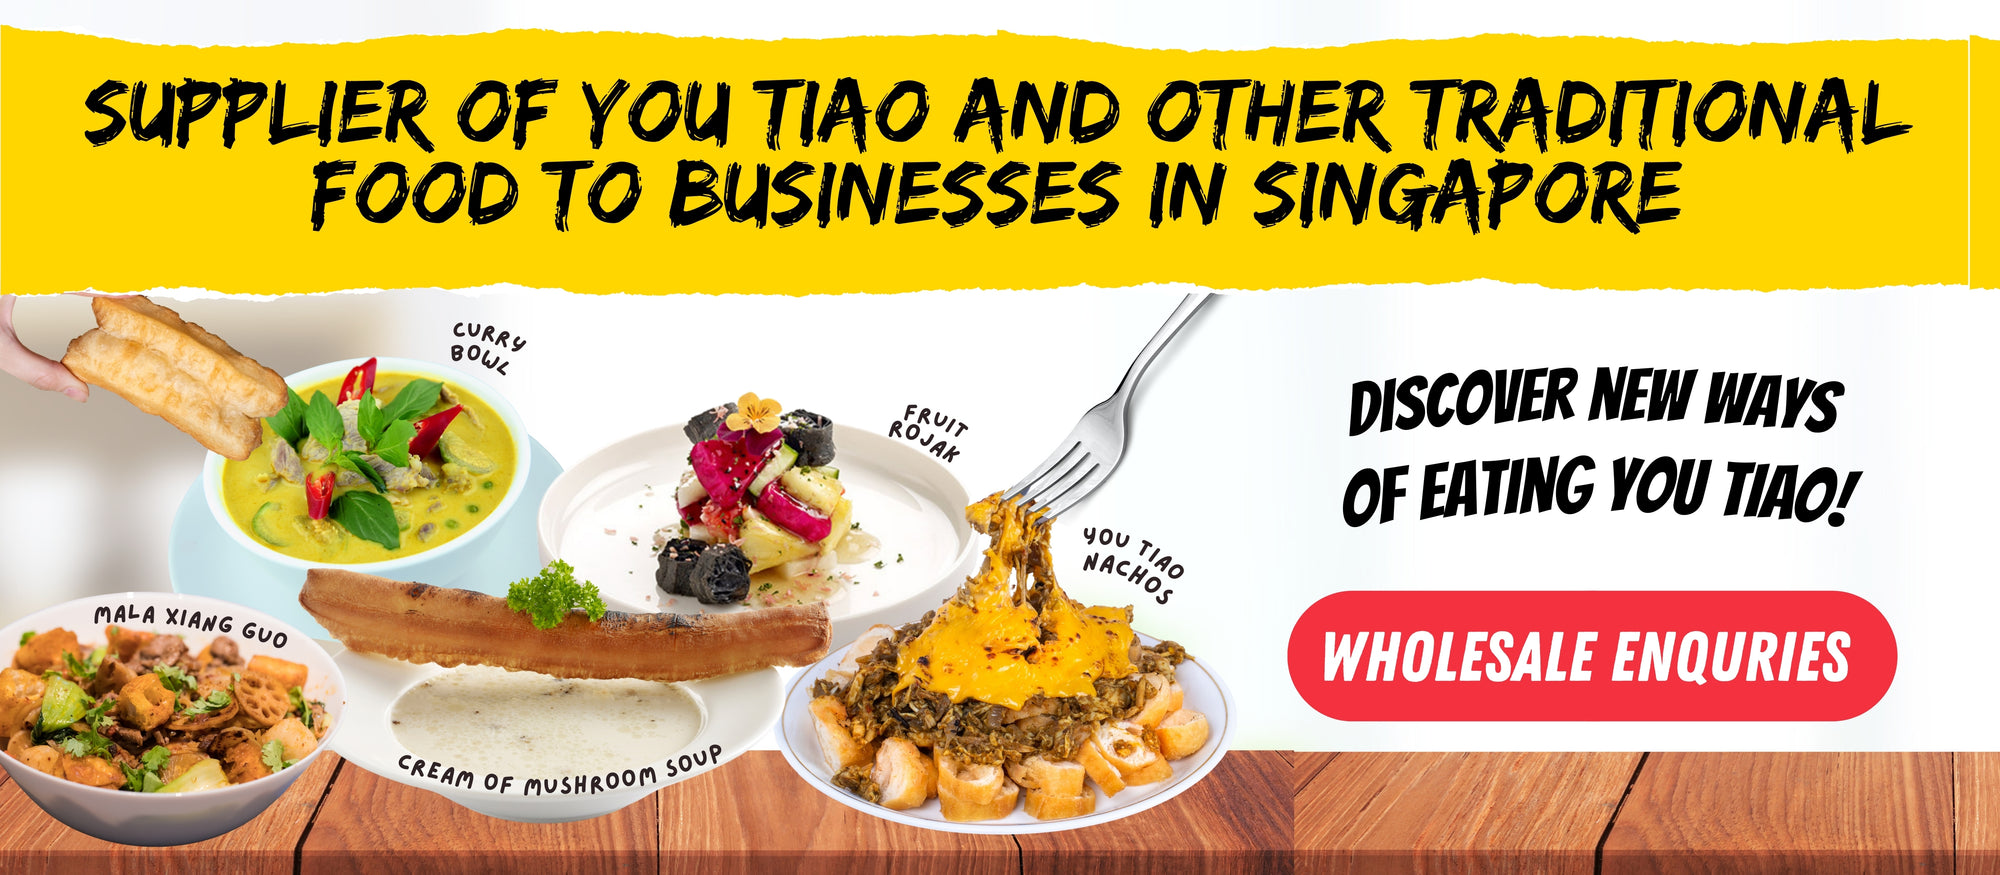 Supplier of Youtiao to businesses in Singapore. Discover new ways of eating Youtiao, curry bowl with Youtiao, Fruit rojak, Youtiao Nachos, Youtiao in Mala Xiang Guo, Cream of mushroom soup with Youtiao on the side. Wholesale enquires available. 